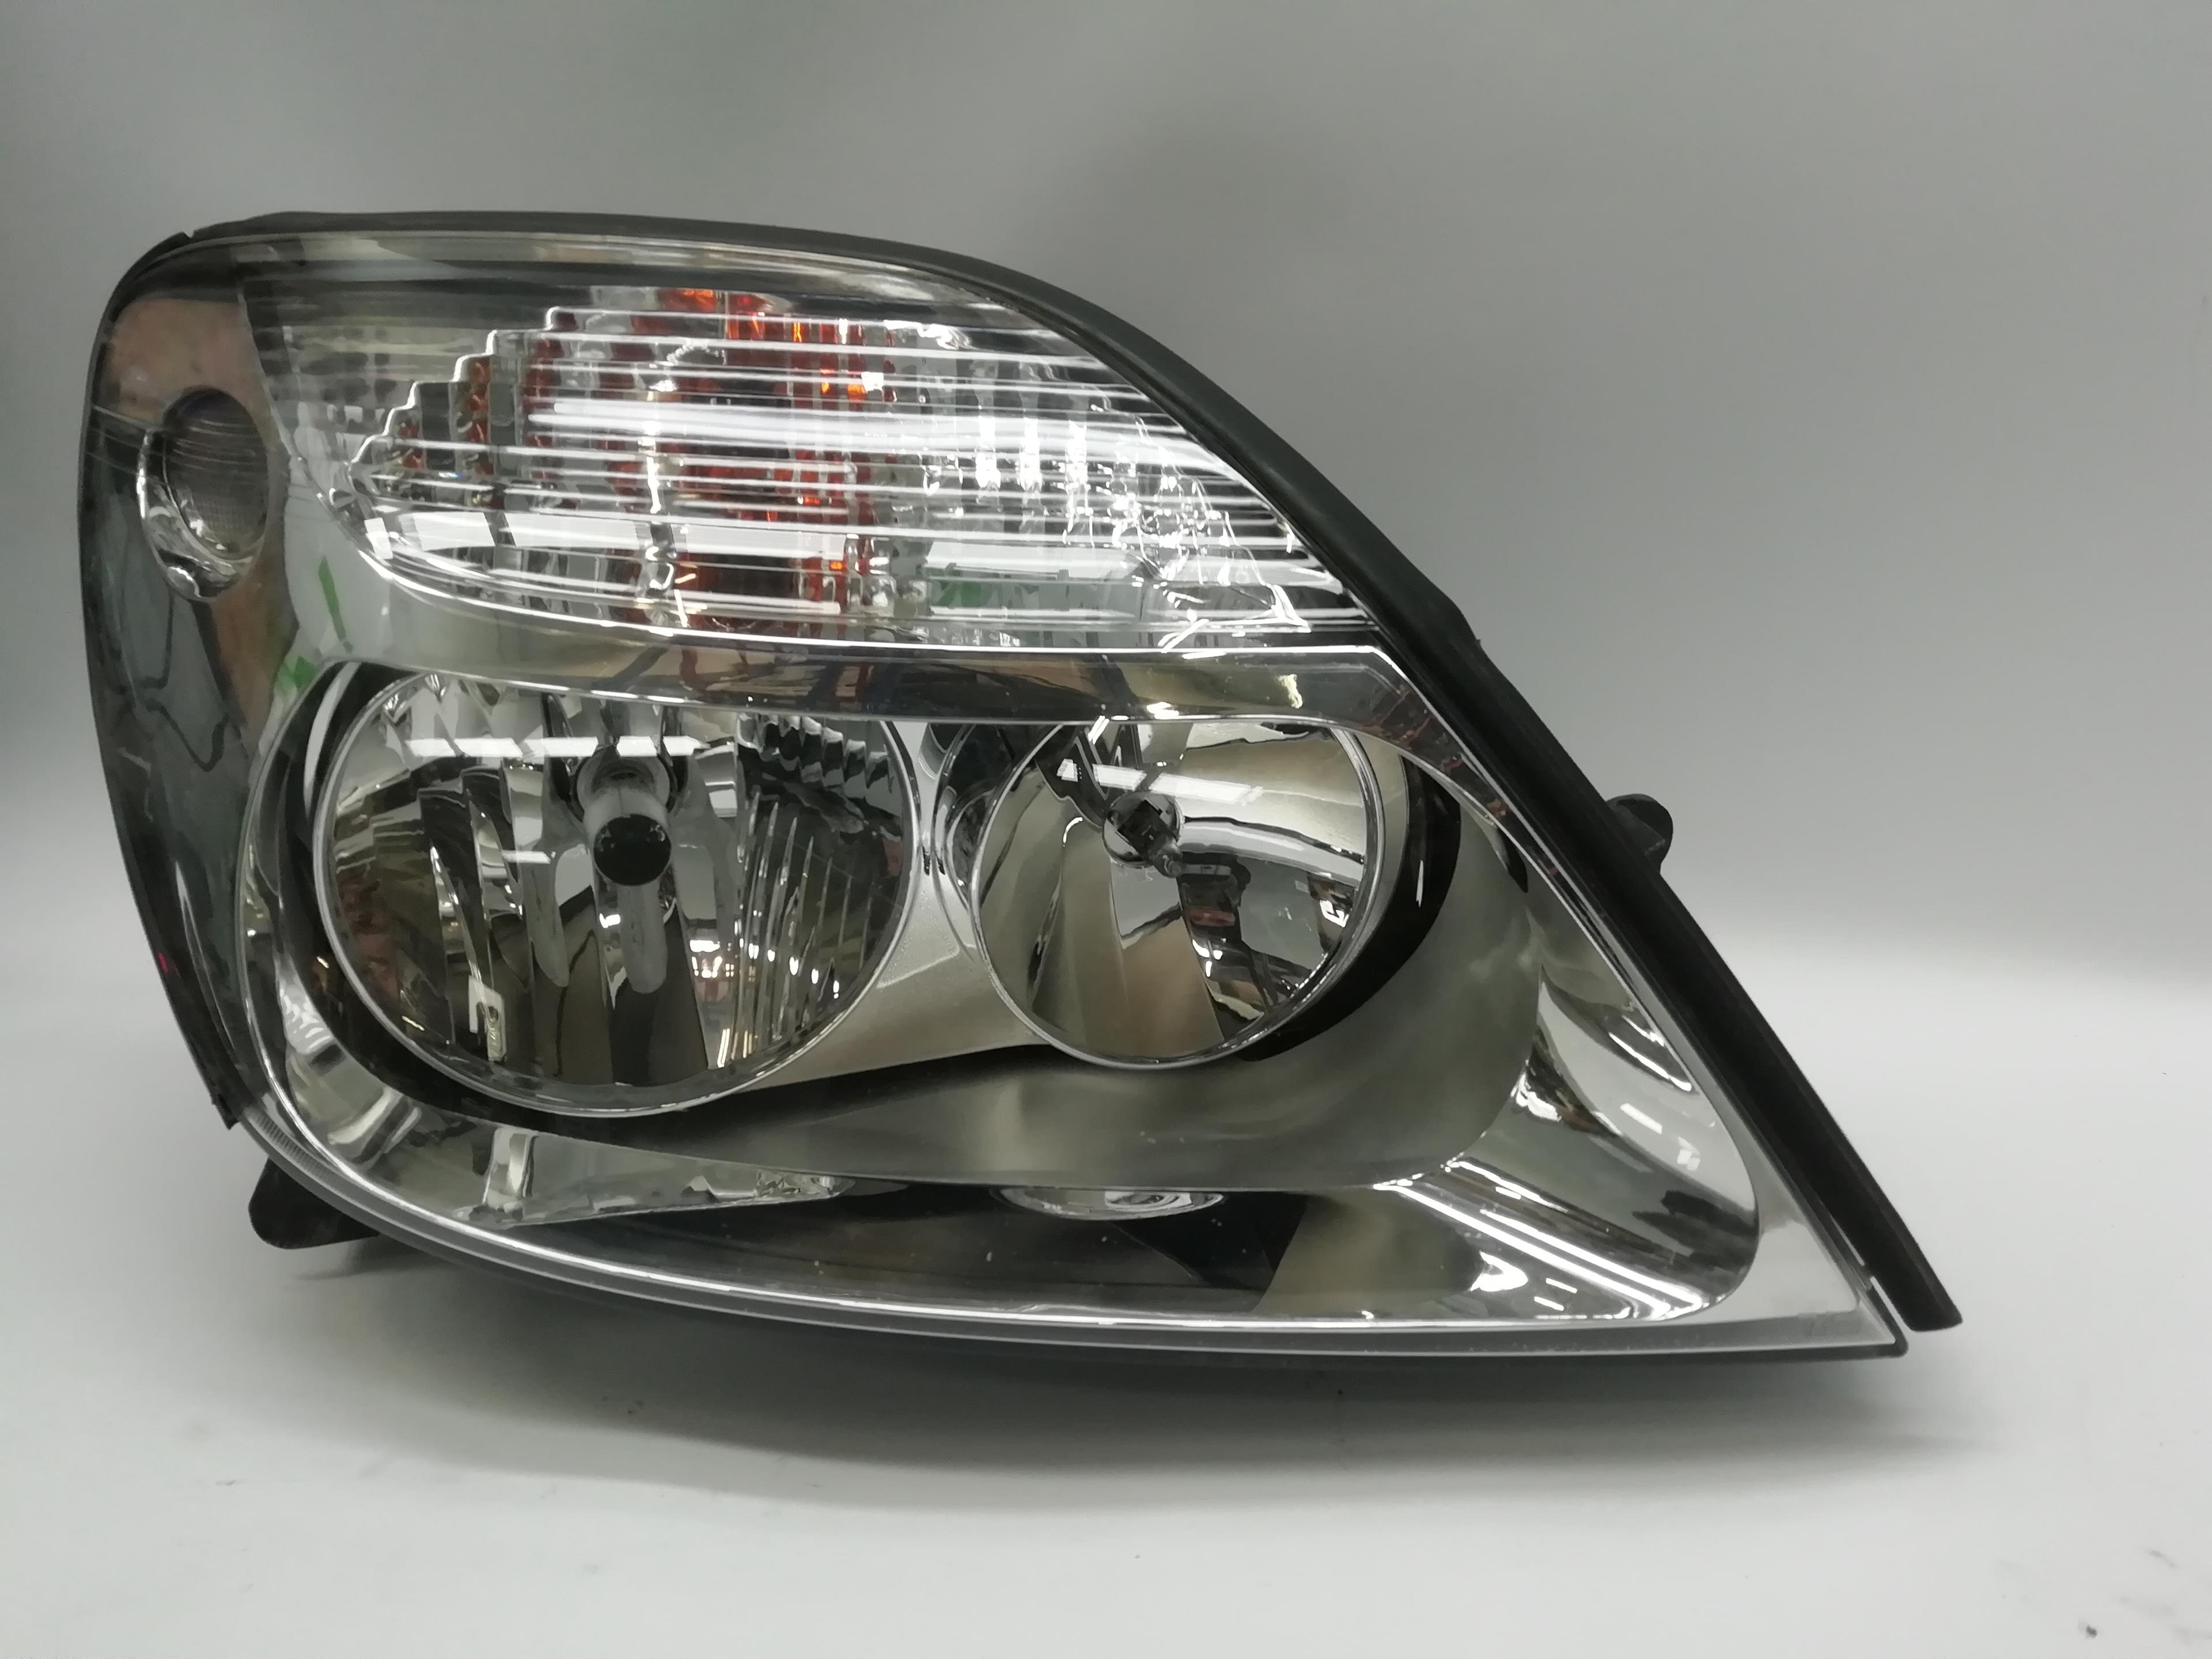 RENAULT Scenic 1 generation (1996-2003) Front Right Headlight 260102746R 25181512